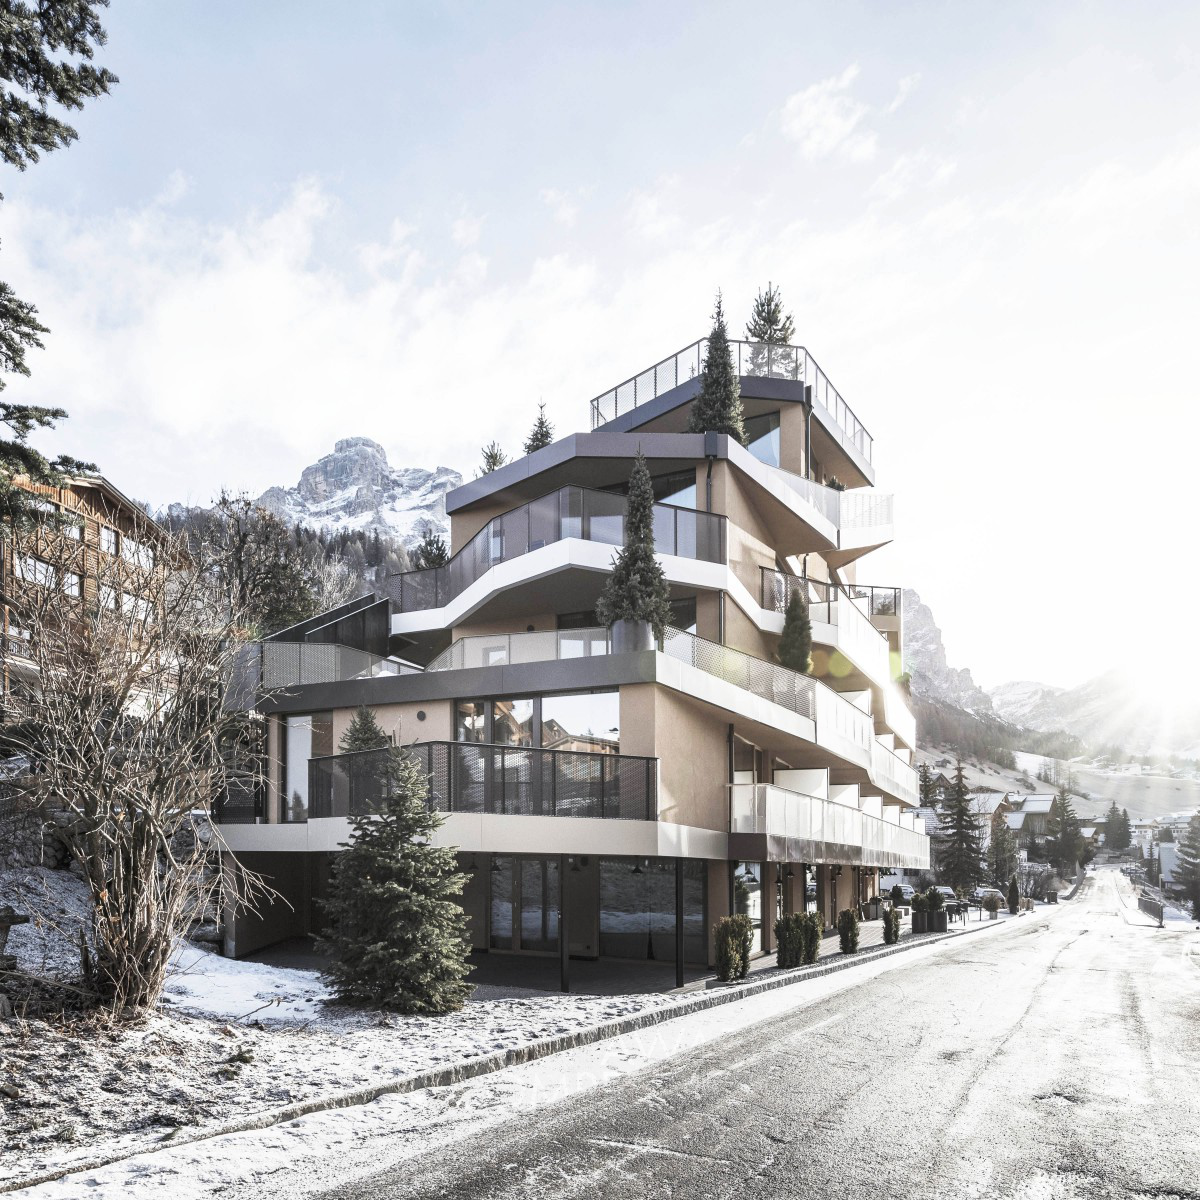 Tofana  Hotel by noa* - network of architecture